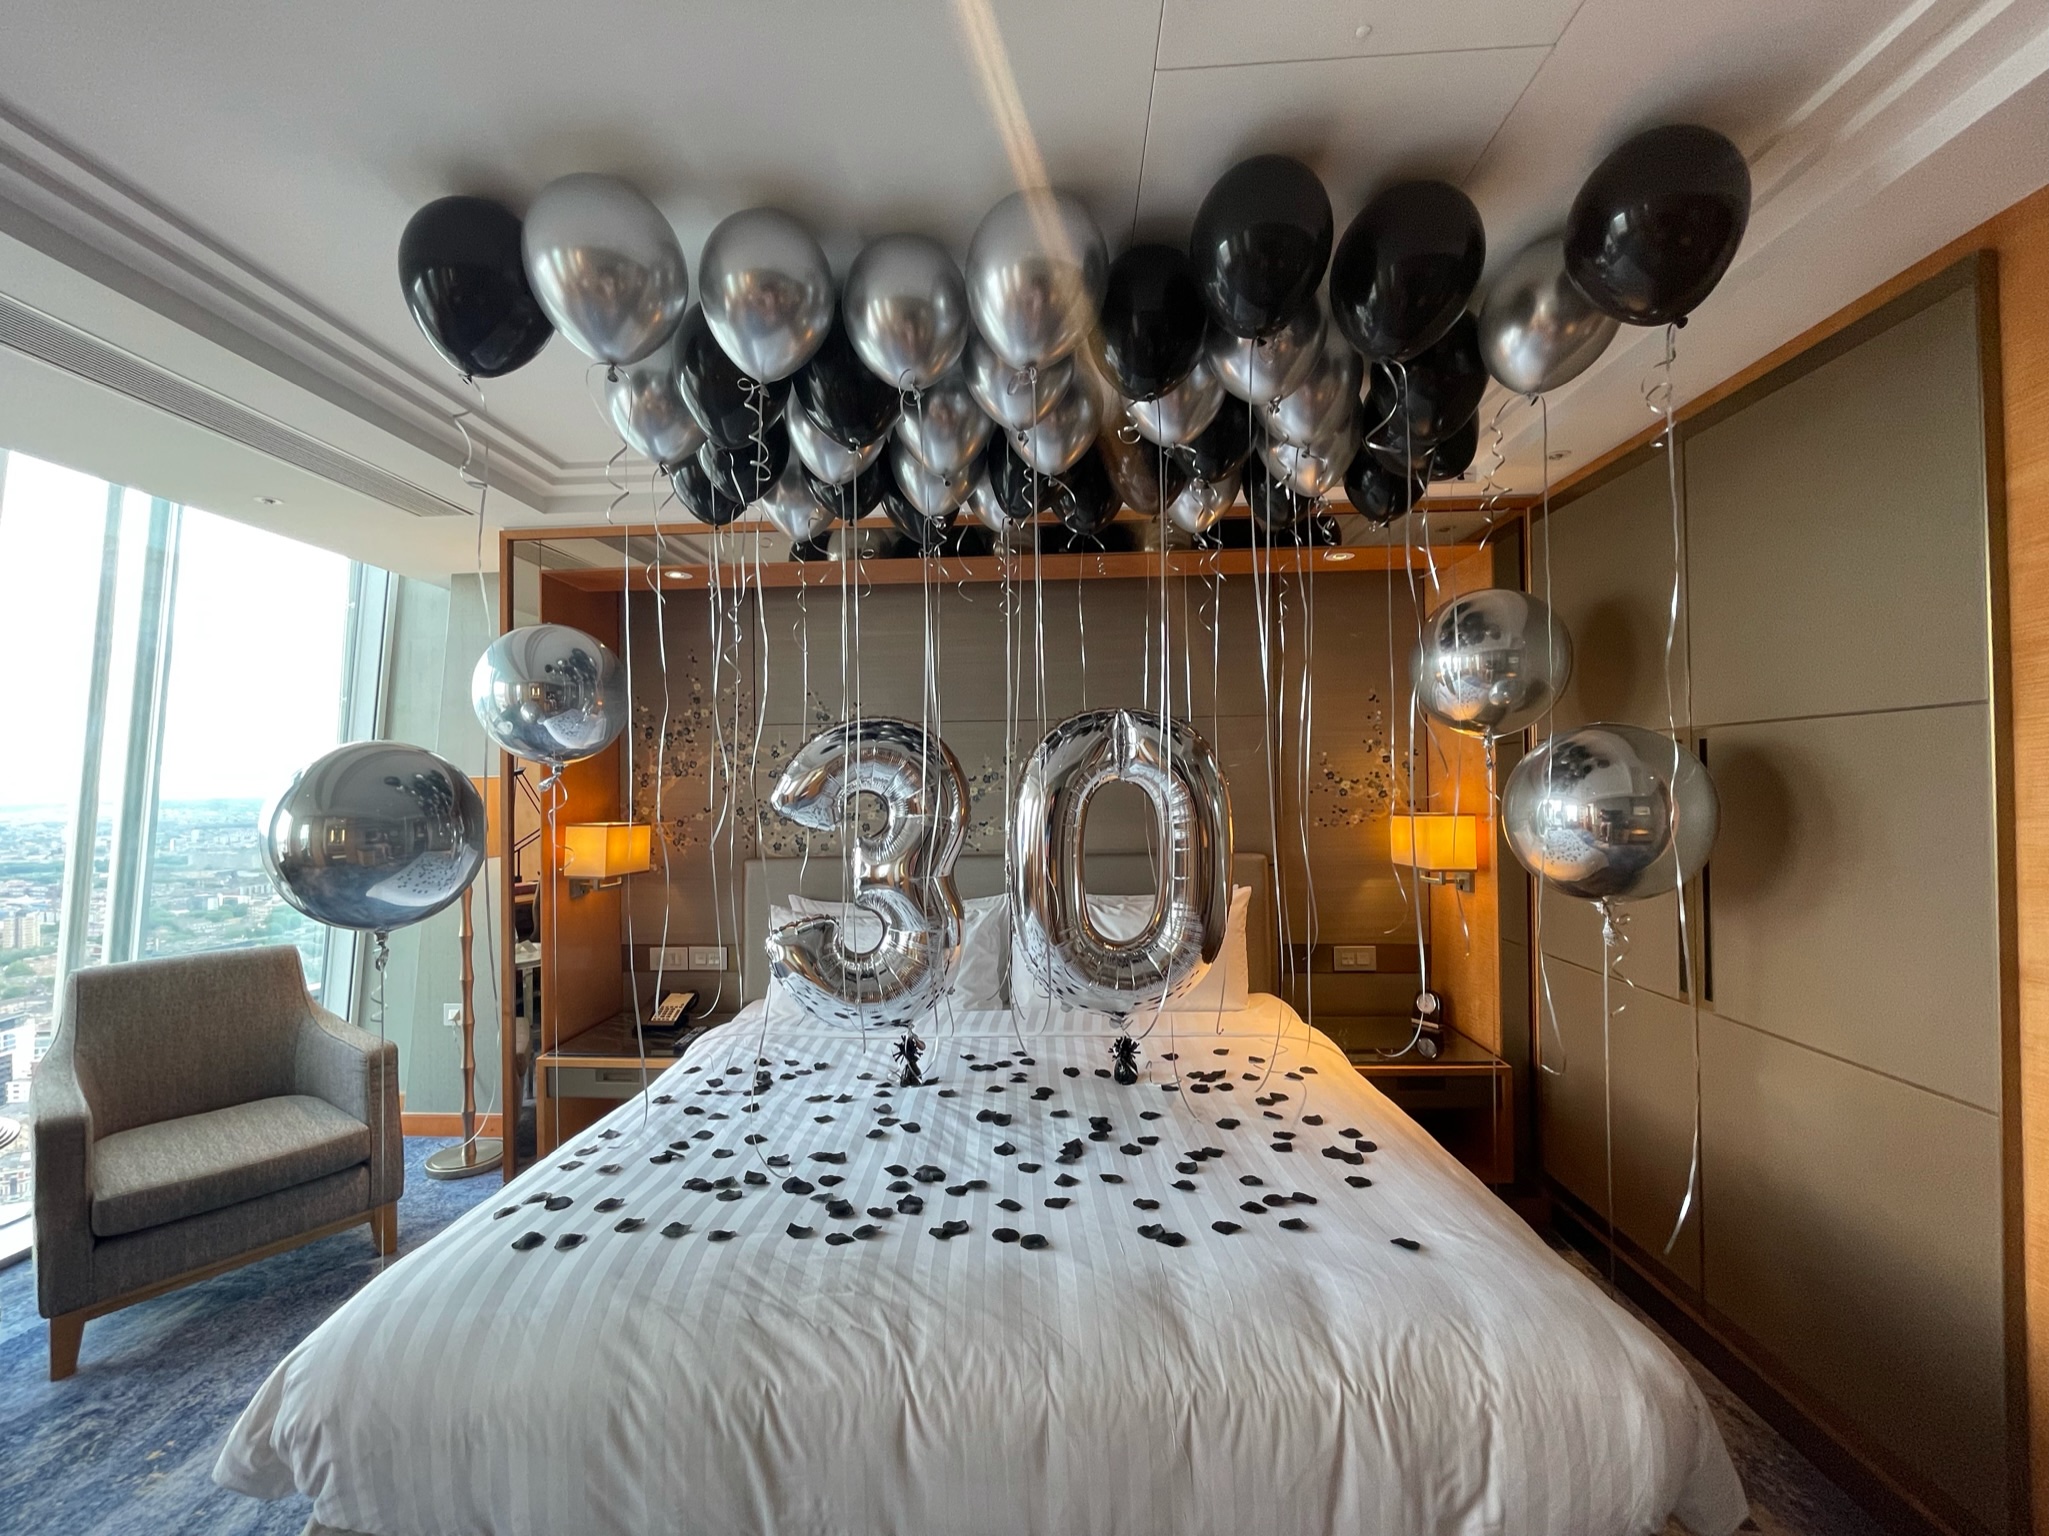 Hotel room decorated with number 30 balloons